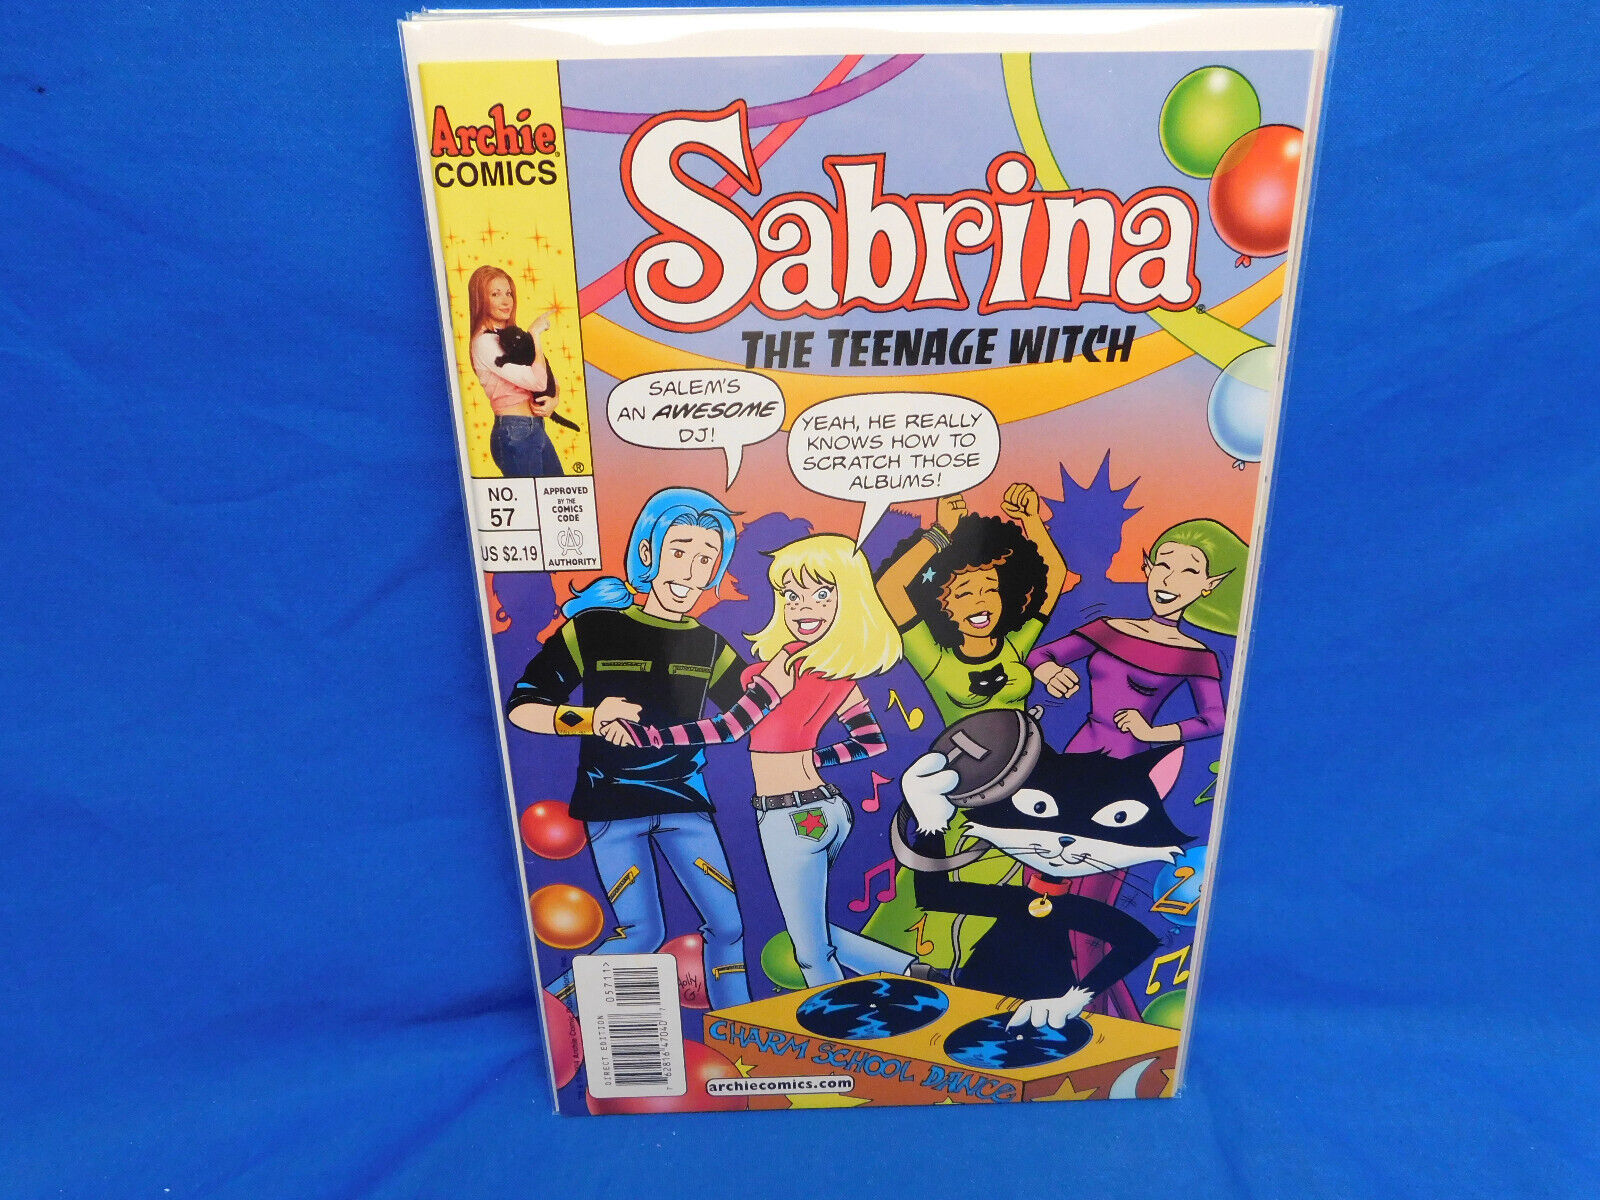 SABRINA THE TEENAGE WITCH #57 (ARCHIE Comics) VF/NM Holly G Golightly Cover